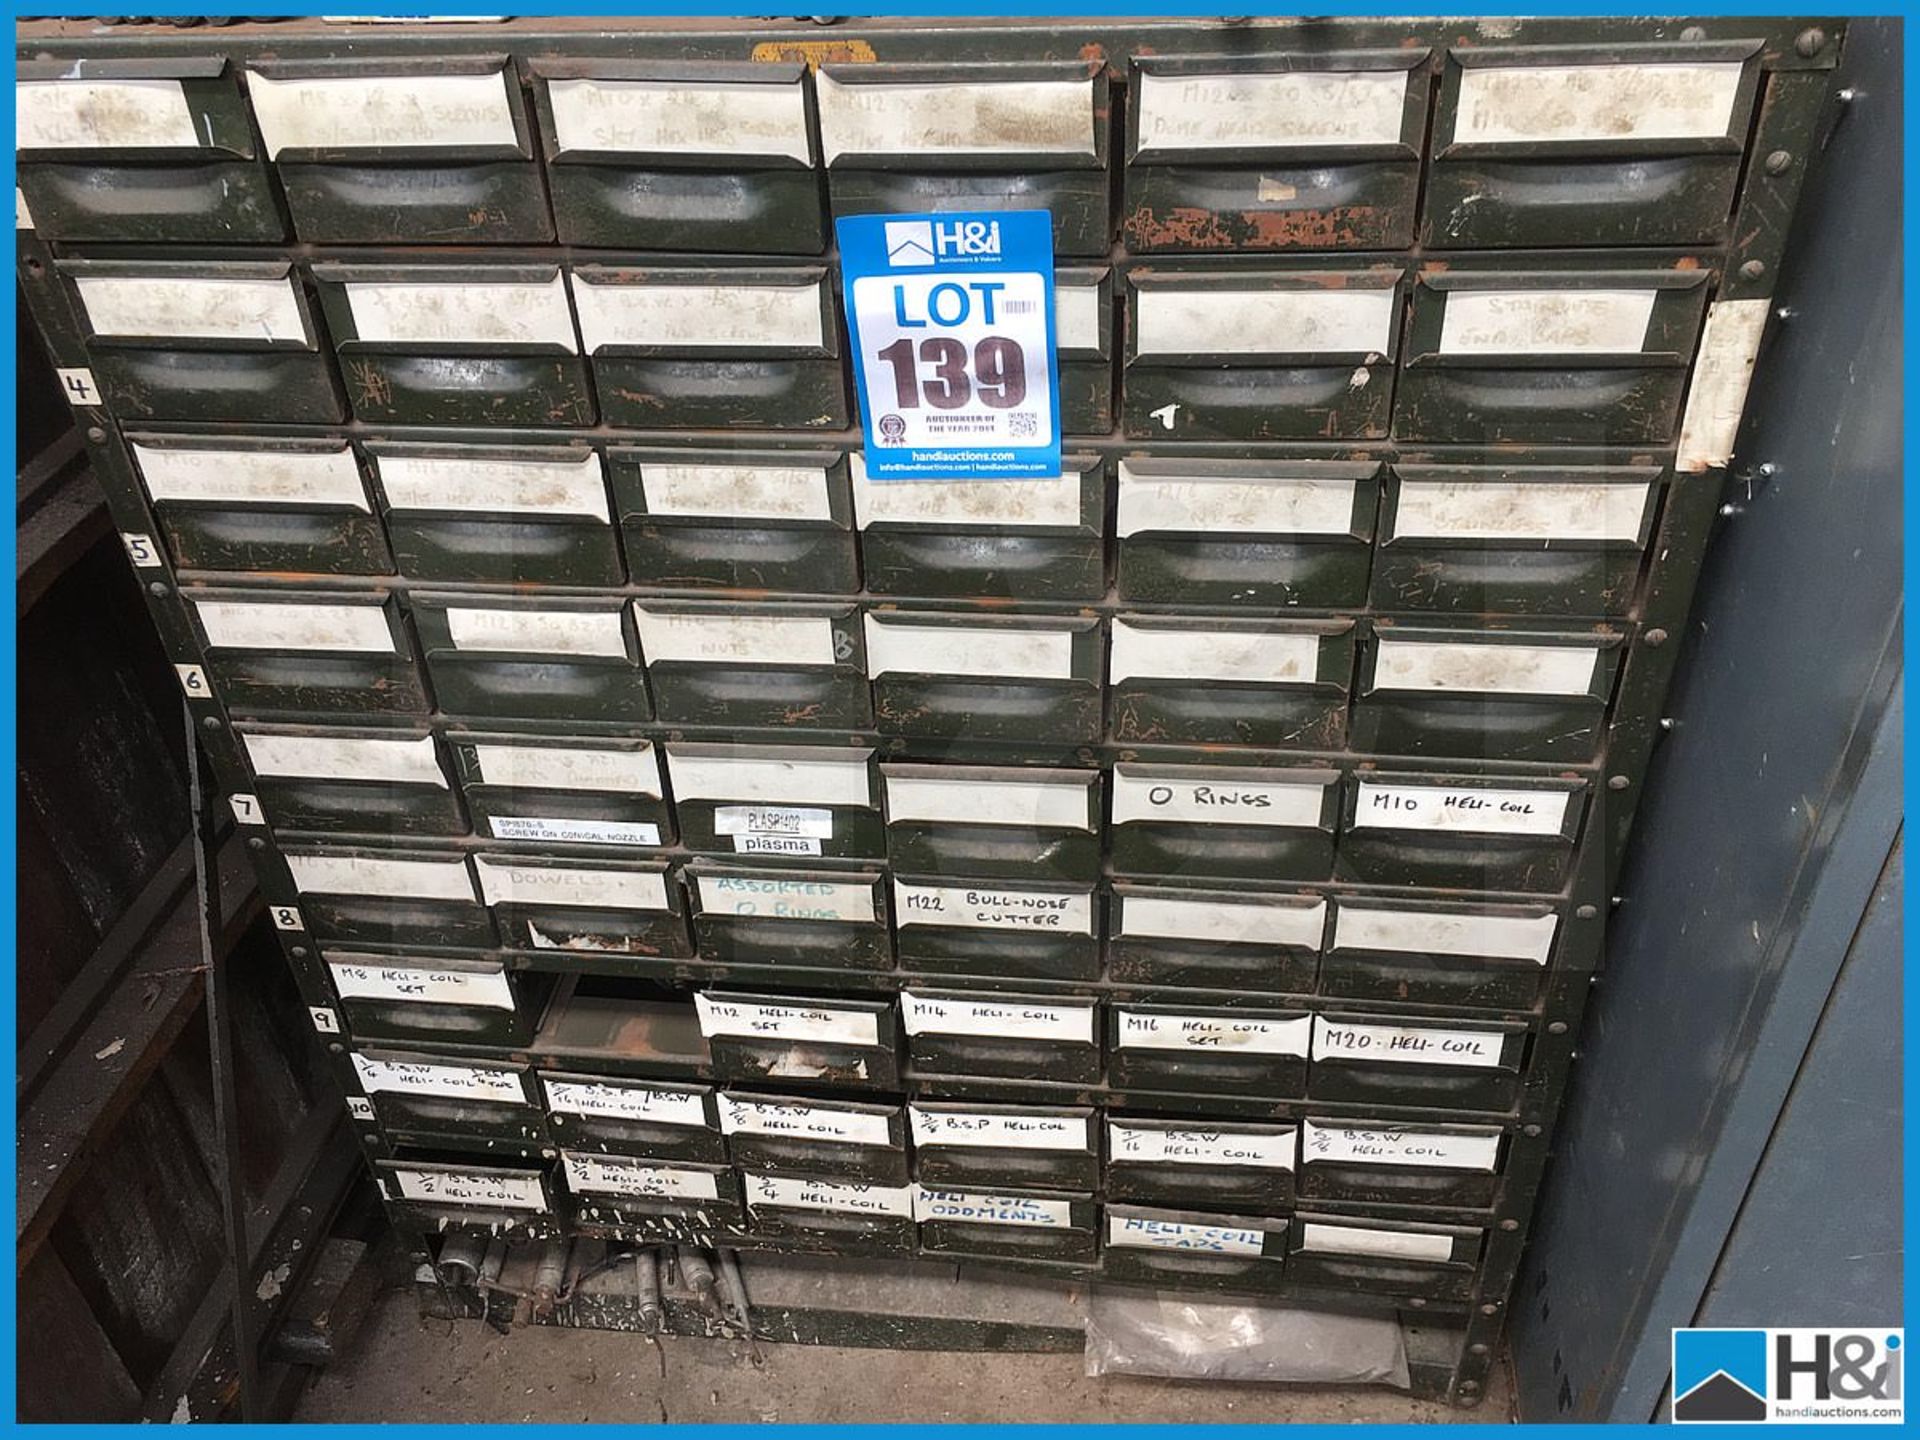 Job lot of industrial component drawers including contents, helicoils etc. Excludes contents to